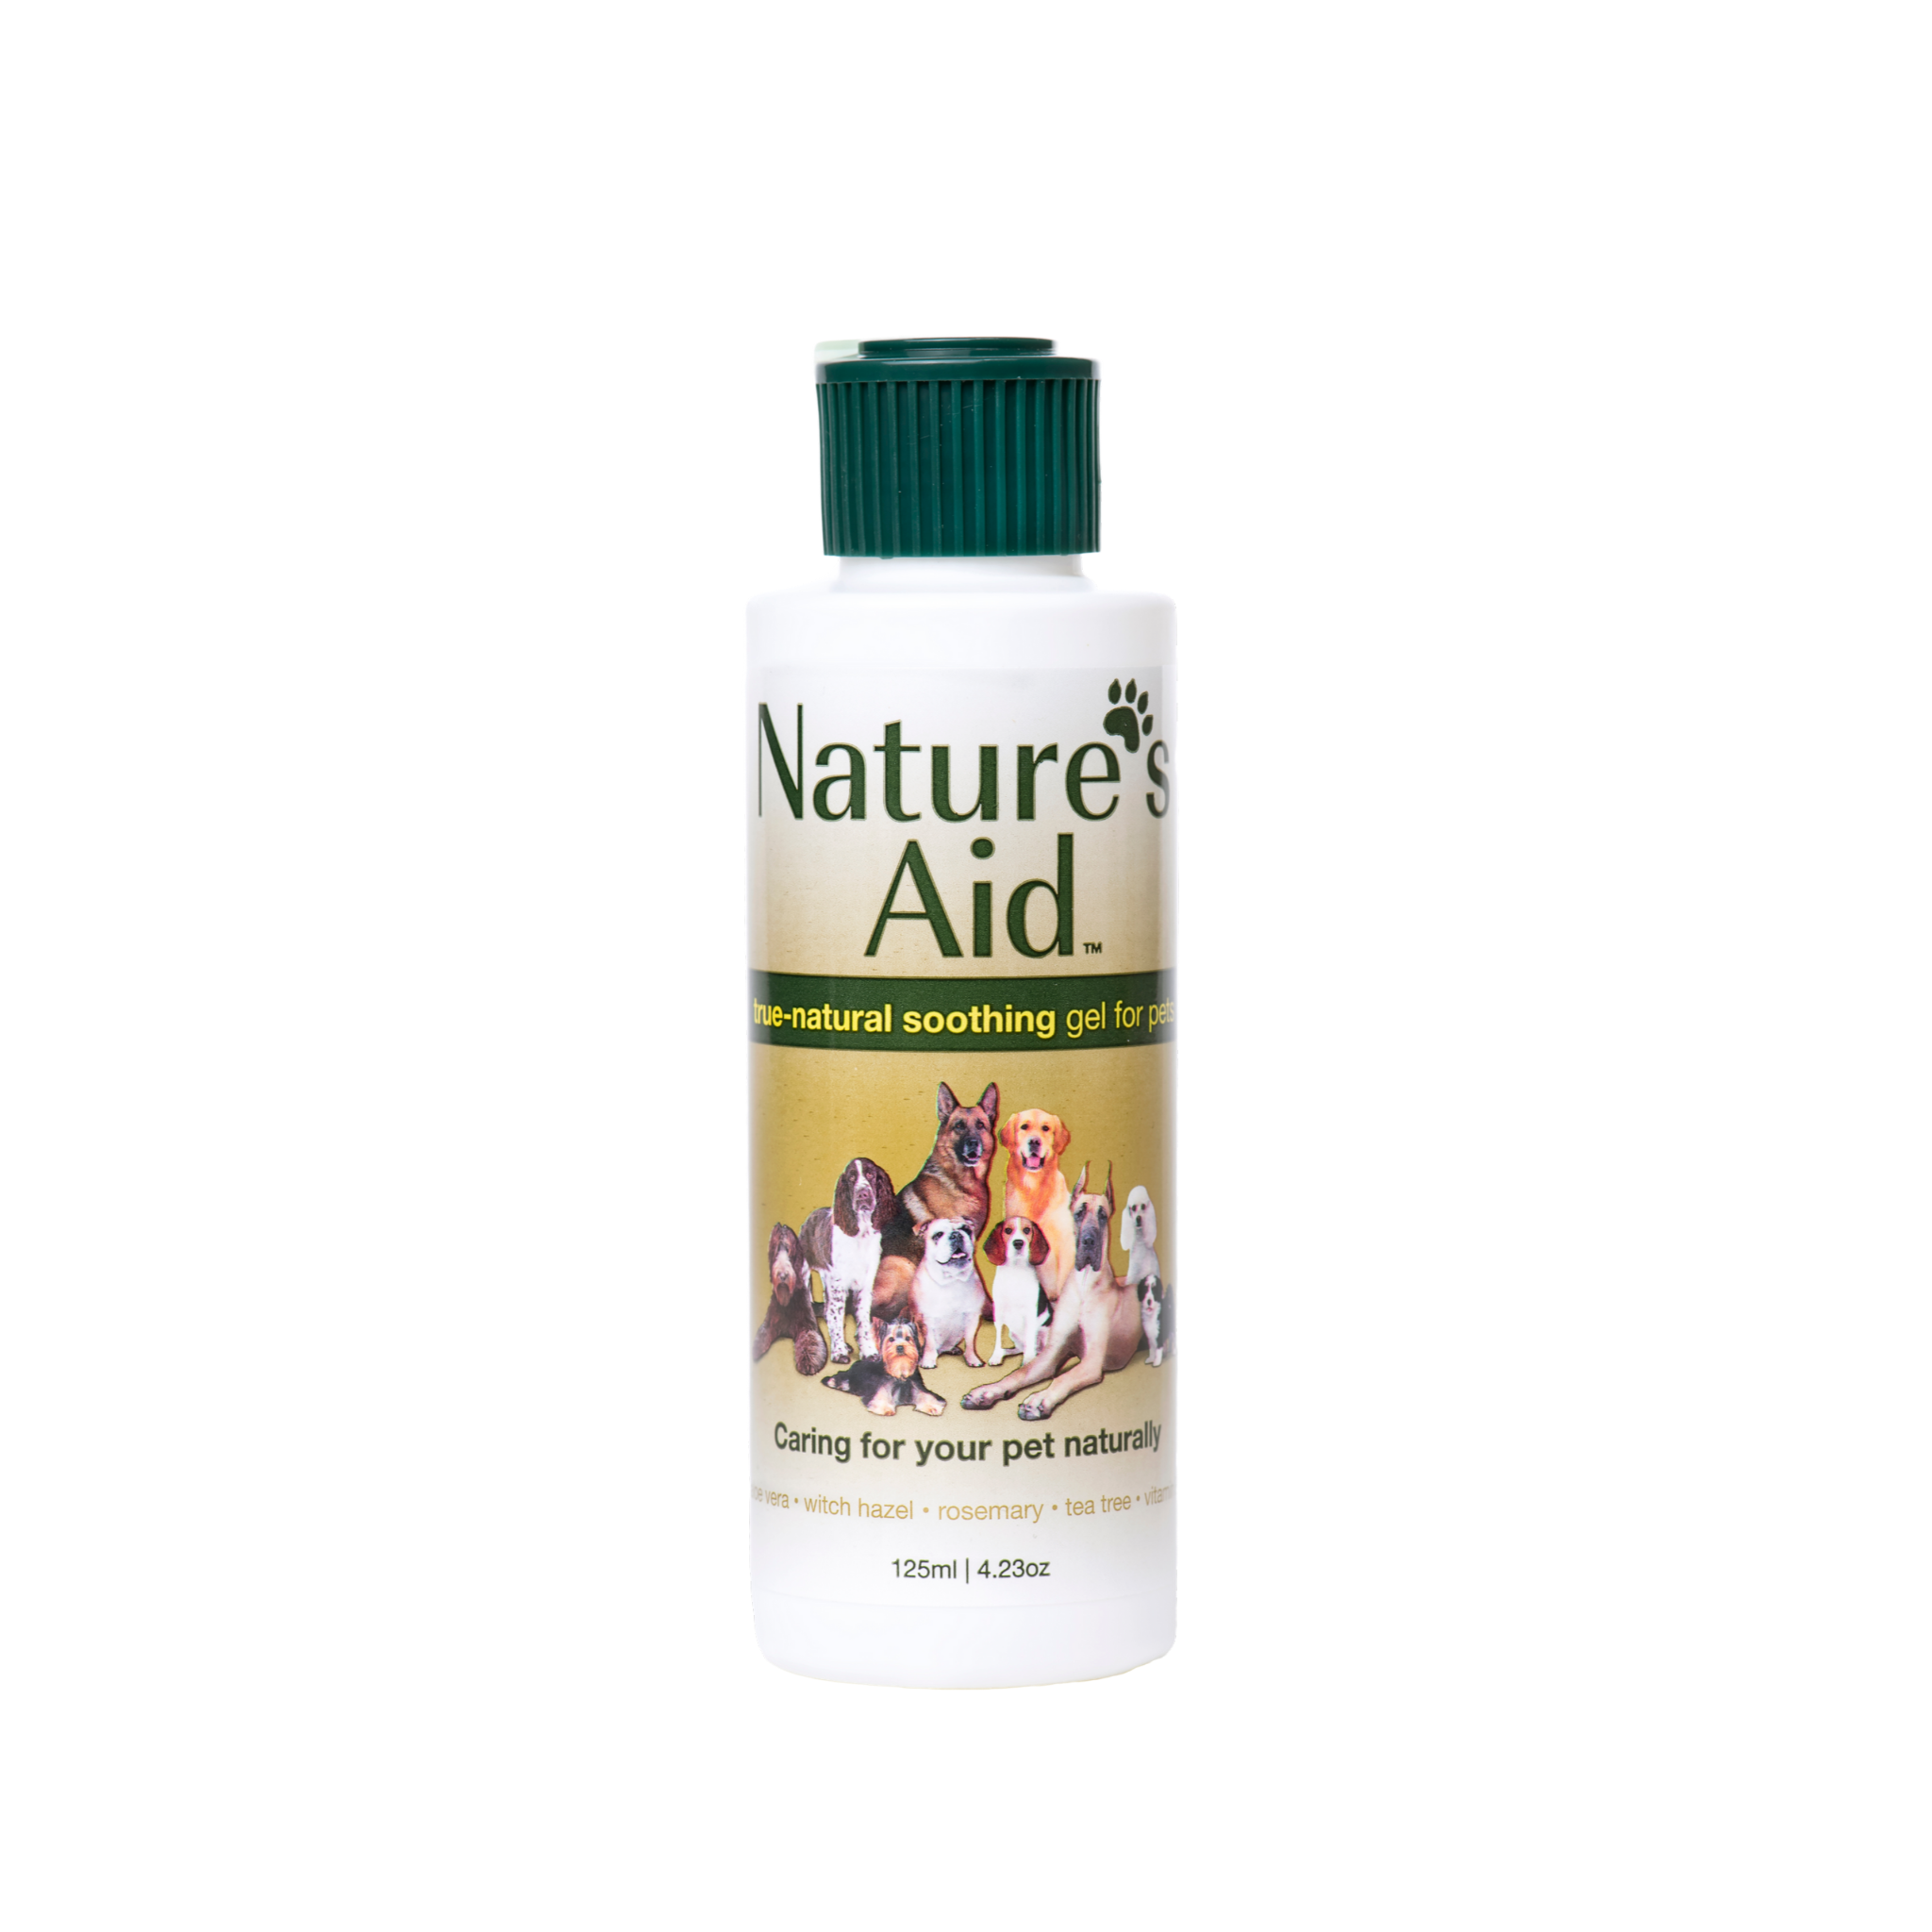 Nature’s Aid Soothing Skin Gel for Pets 125ml